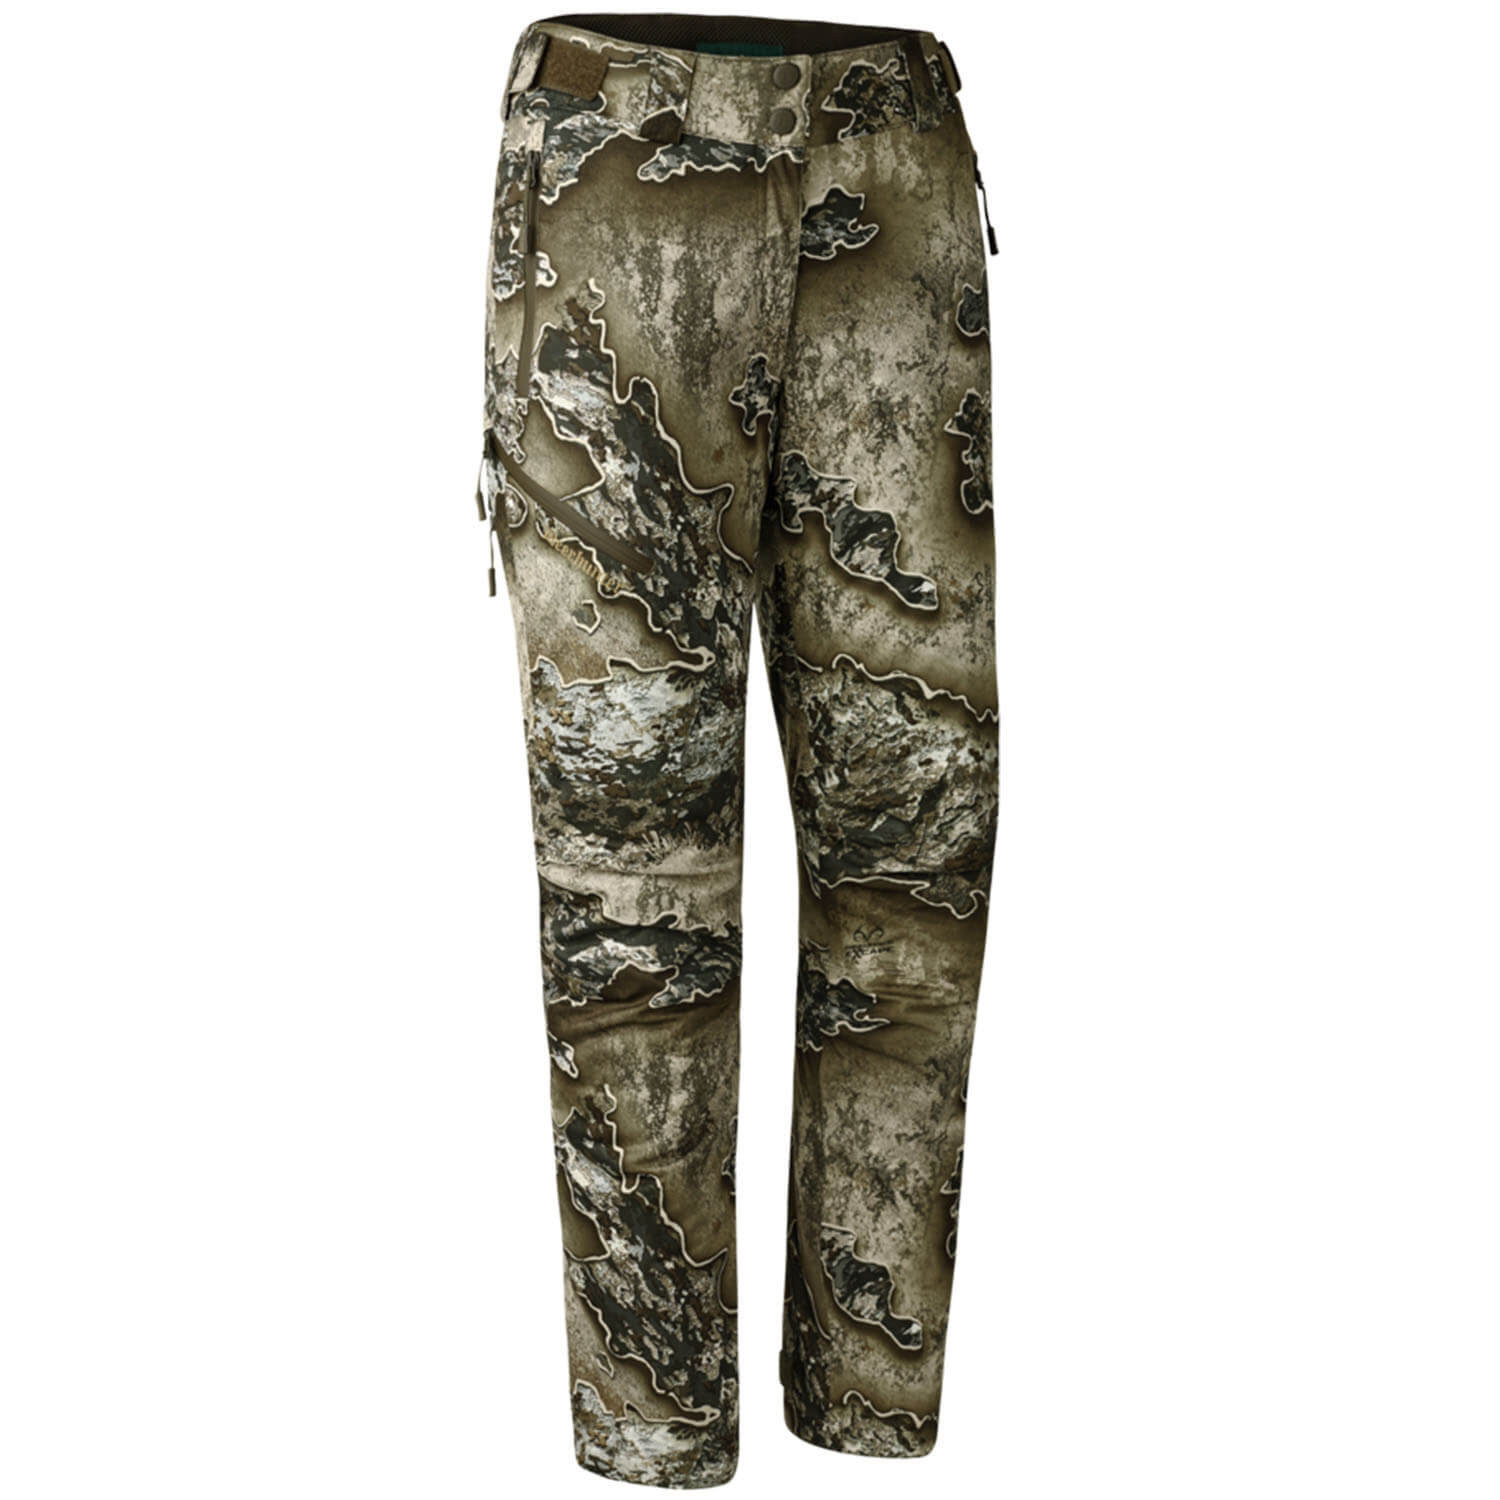 Deerhunter winter Trousers Lady Excape (realtree excape) - Winter Hunting Clothing